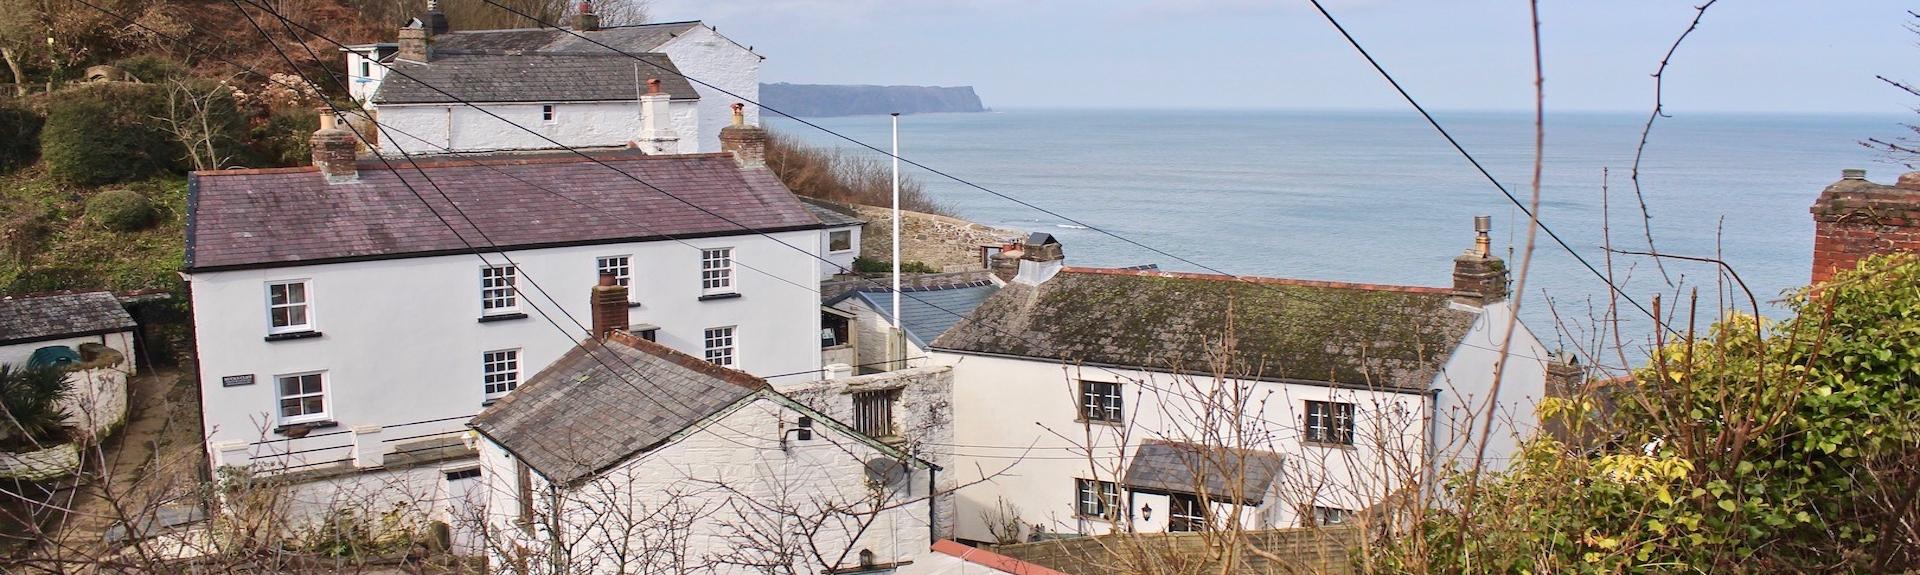 A cluster of three devon fishermen's cottages nestled in a woodland gap overlooking the ocean